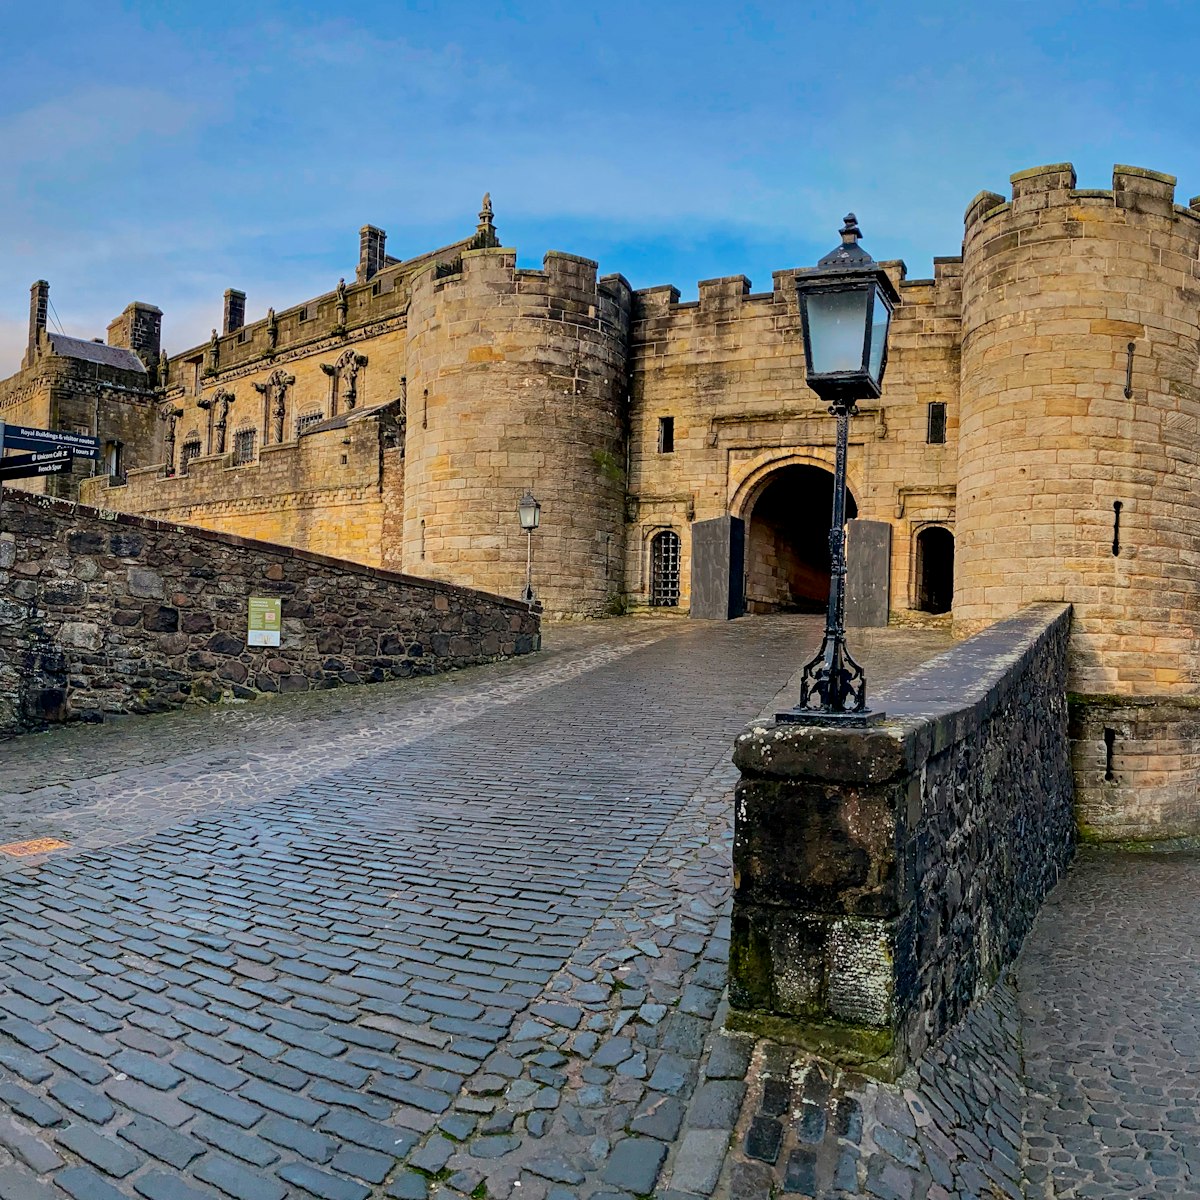 Stirling, Scotland, United Kingdom – December 20, 2019: Stirling Castle is a fortified wall sitting atop Castle Hill and is part of the Stirling Sill, a quartz-dolerite formation millions of years old. Records date it back to the early 12th century and the inner grounds are home to replicas of the famous Unicorn Tapestries. The castle offers spectacular views of Stirling from the Outer Defences.